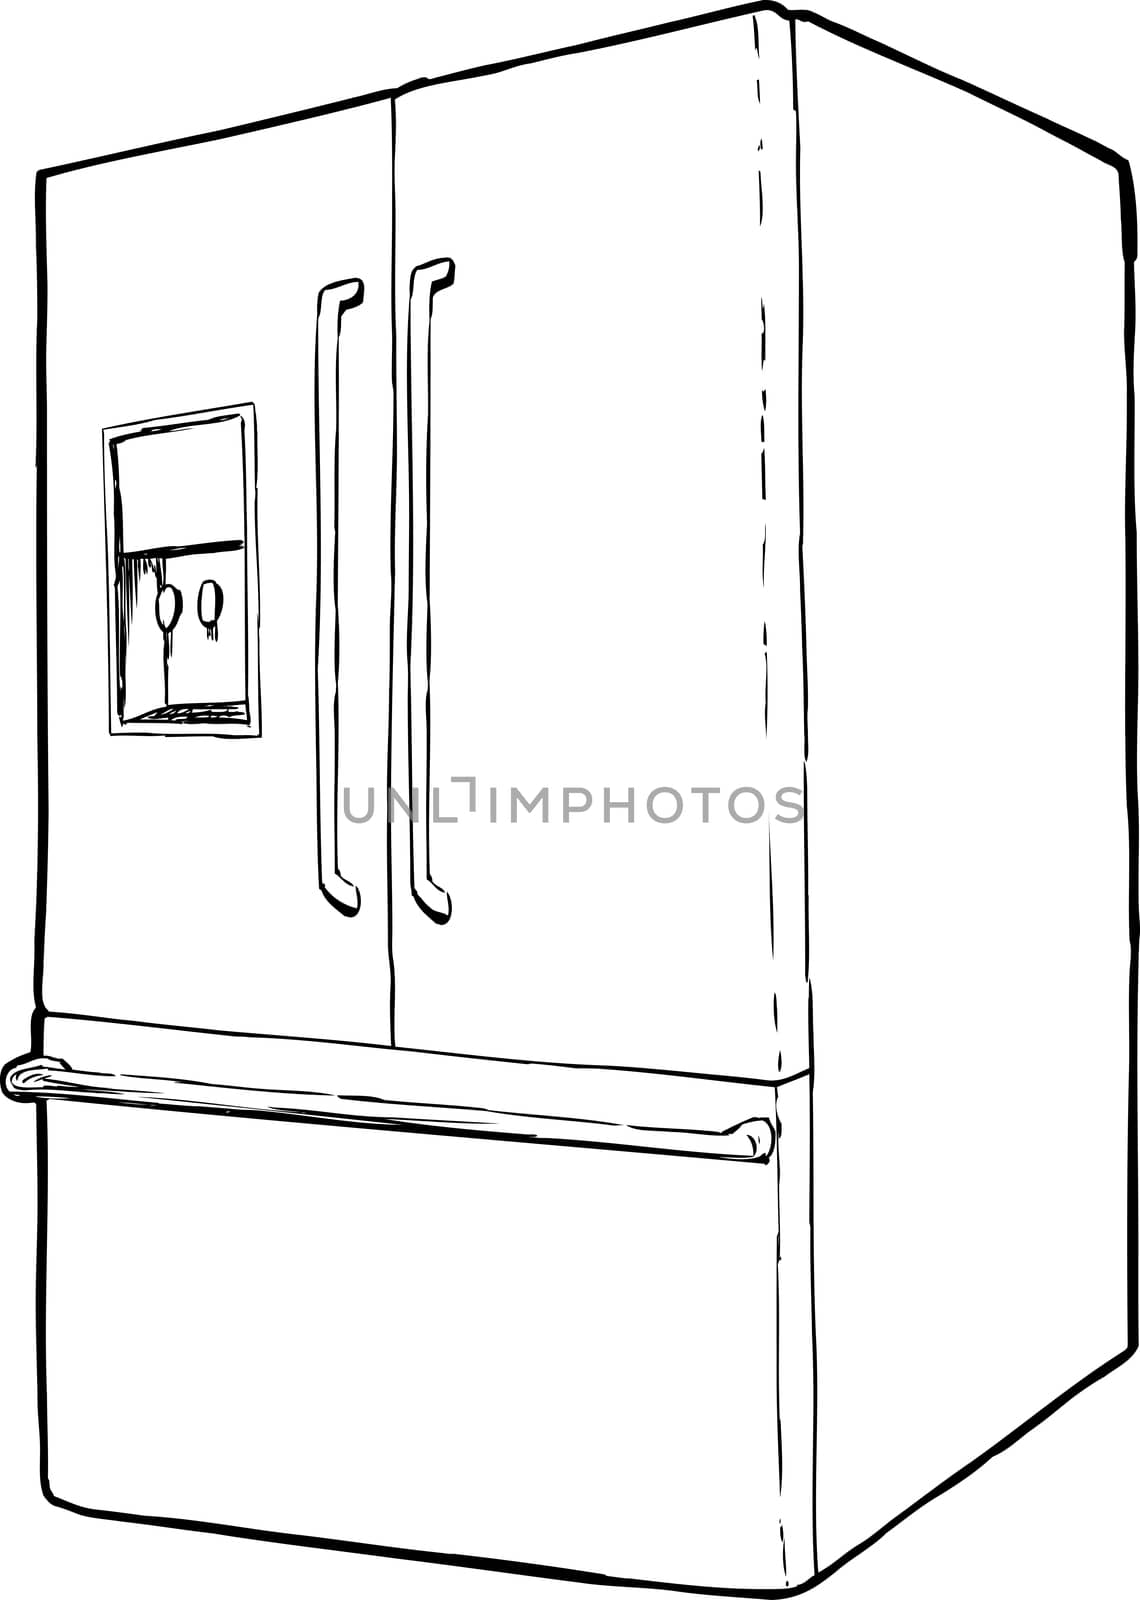 Outlined refrigerator with double doors, water dispenser and freezer drawer